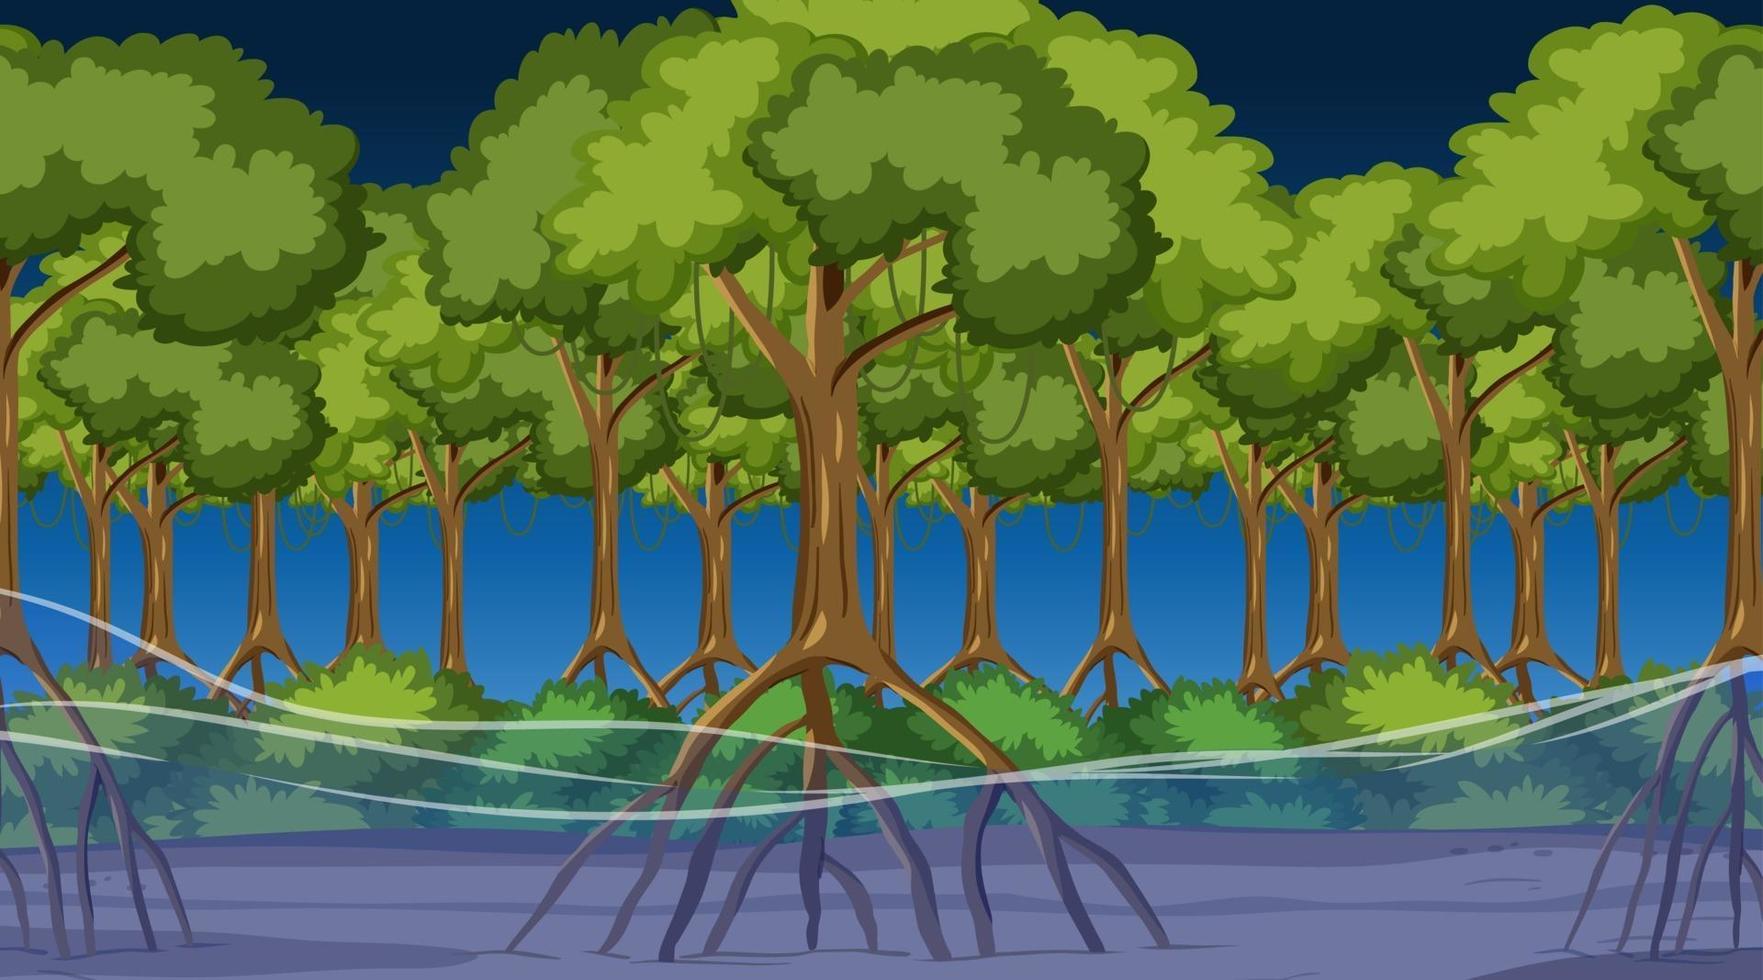 Nature scene with Mangrove forest at night in cartoon style vector